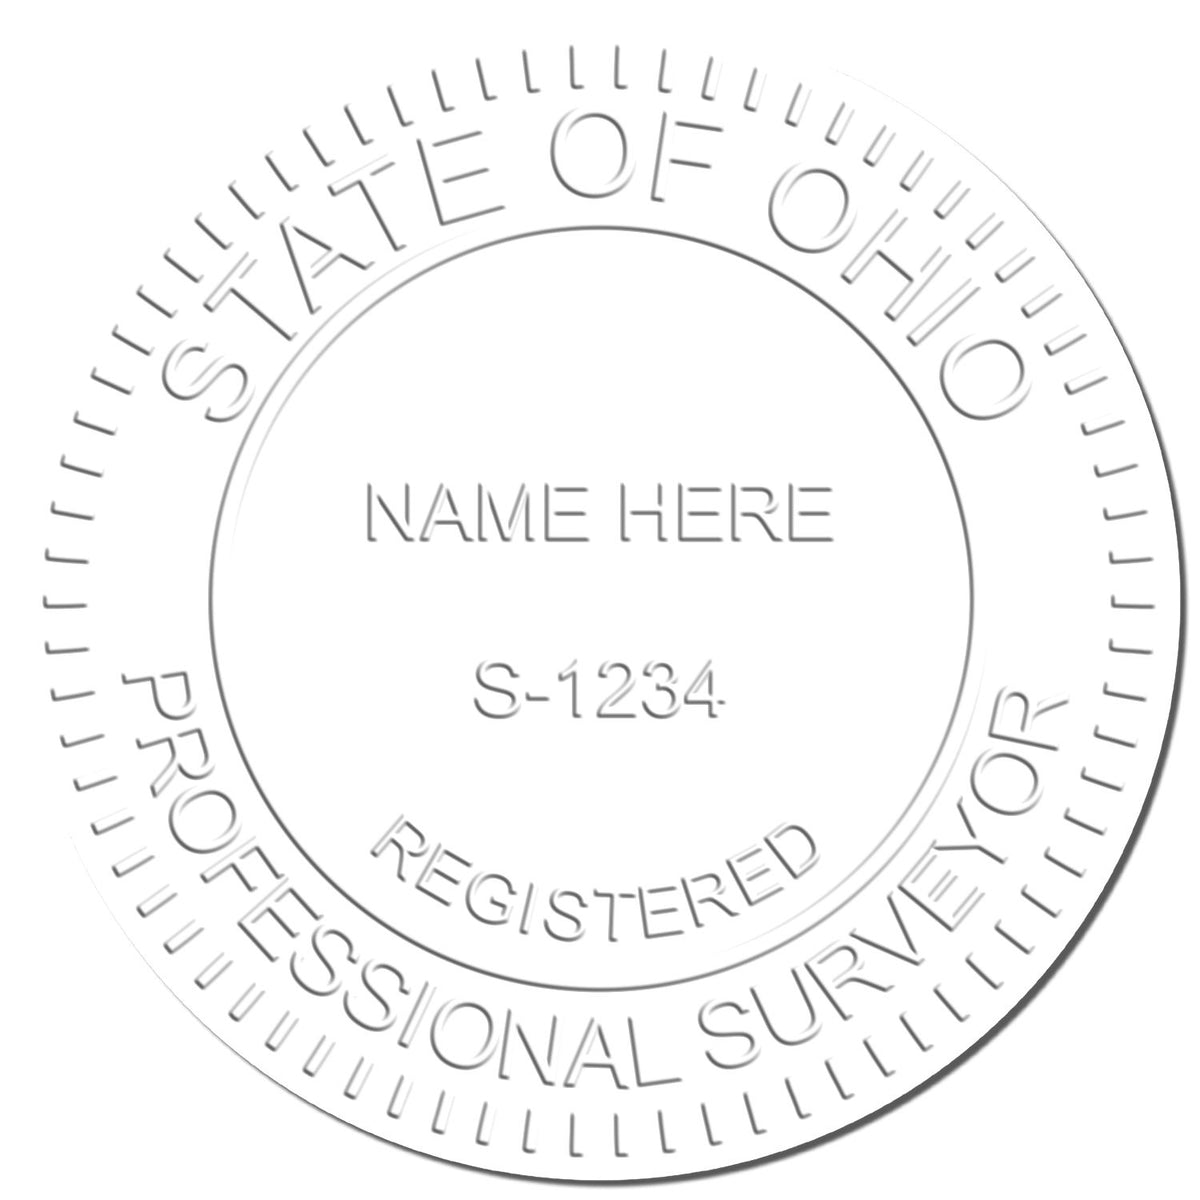 This paper is stamped with a sample imprint of the State of Ohio Soft Land Surveyor Embossing Seal, signifying its quality and reliability.